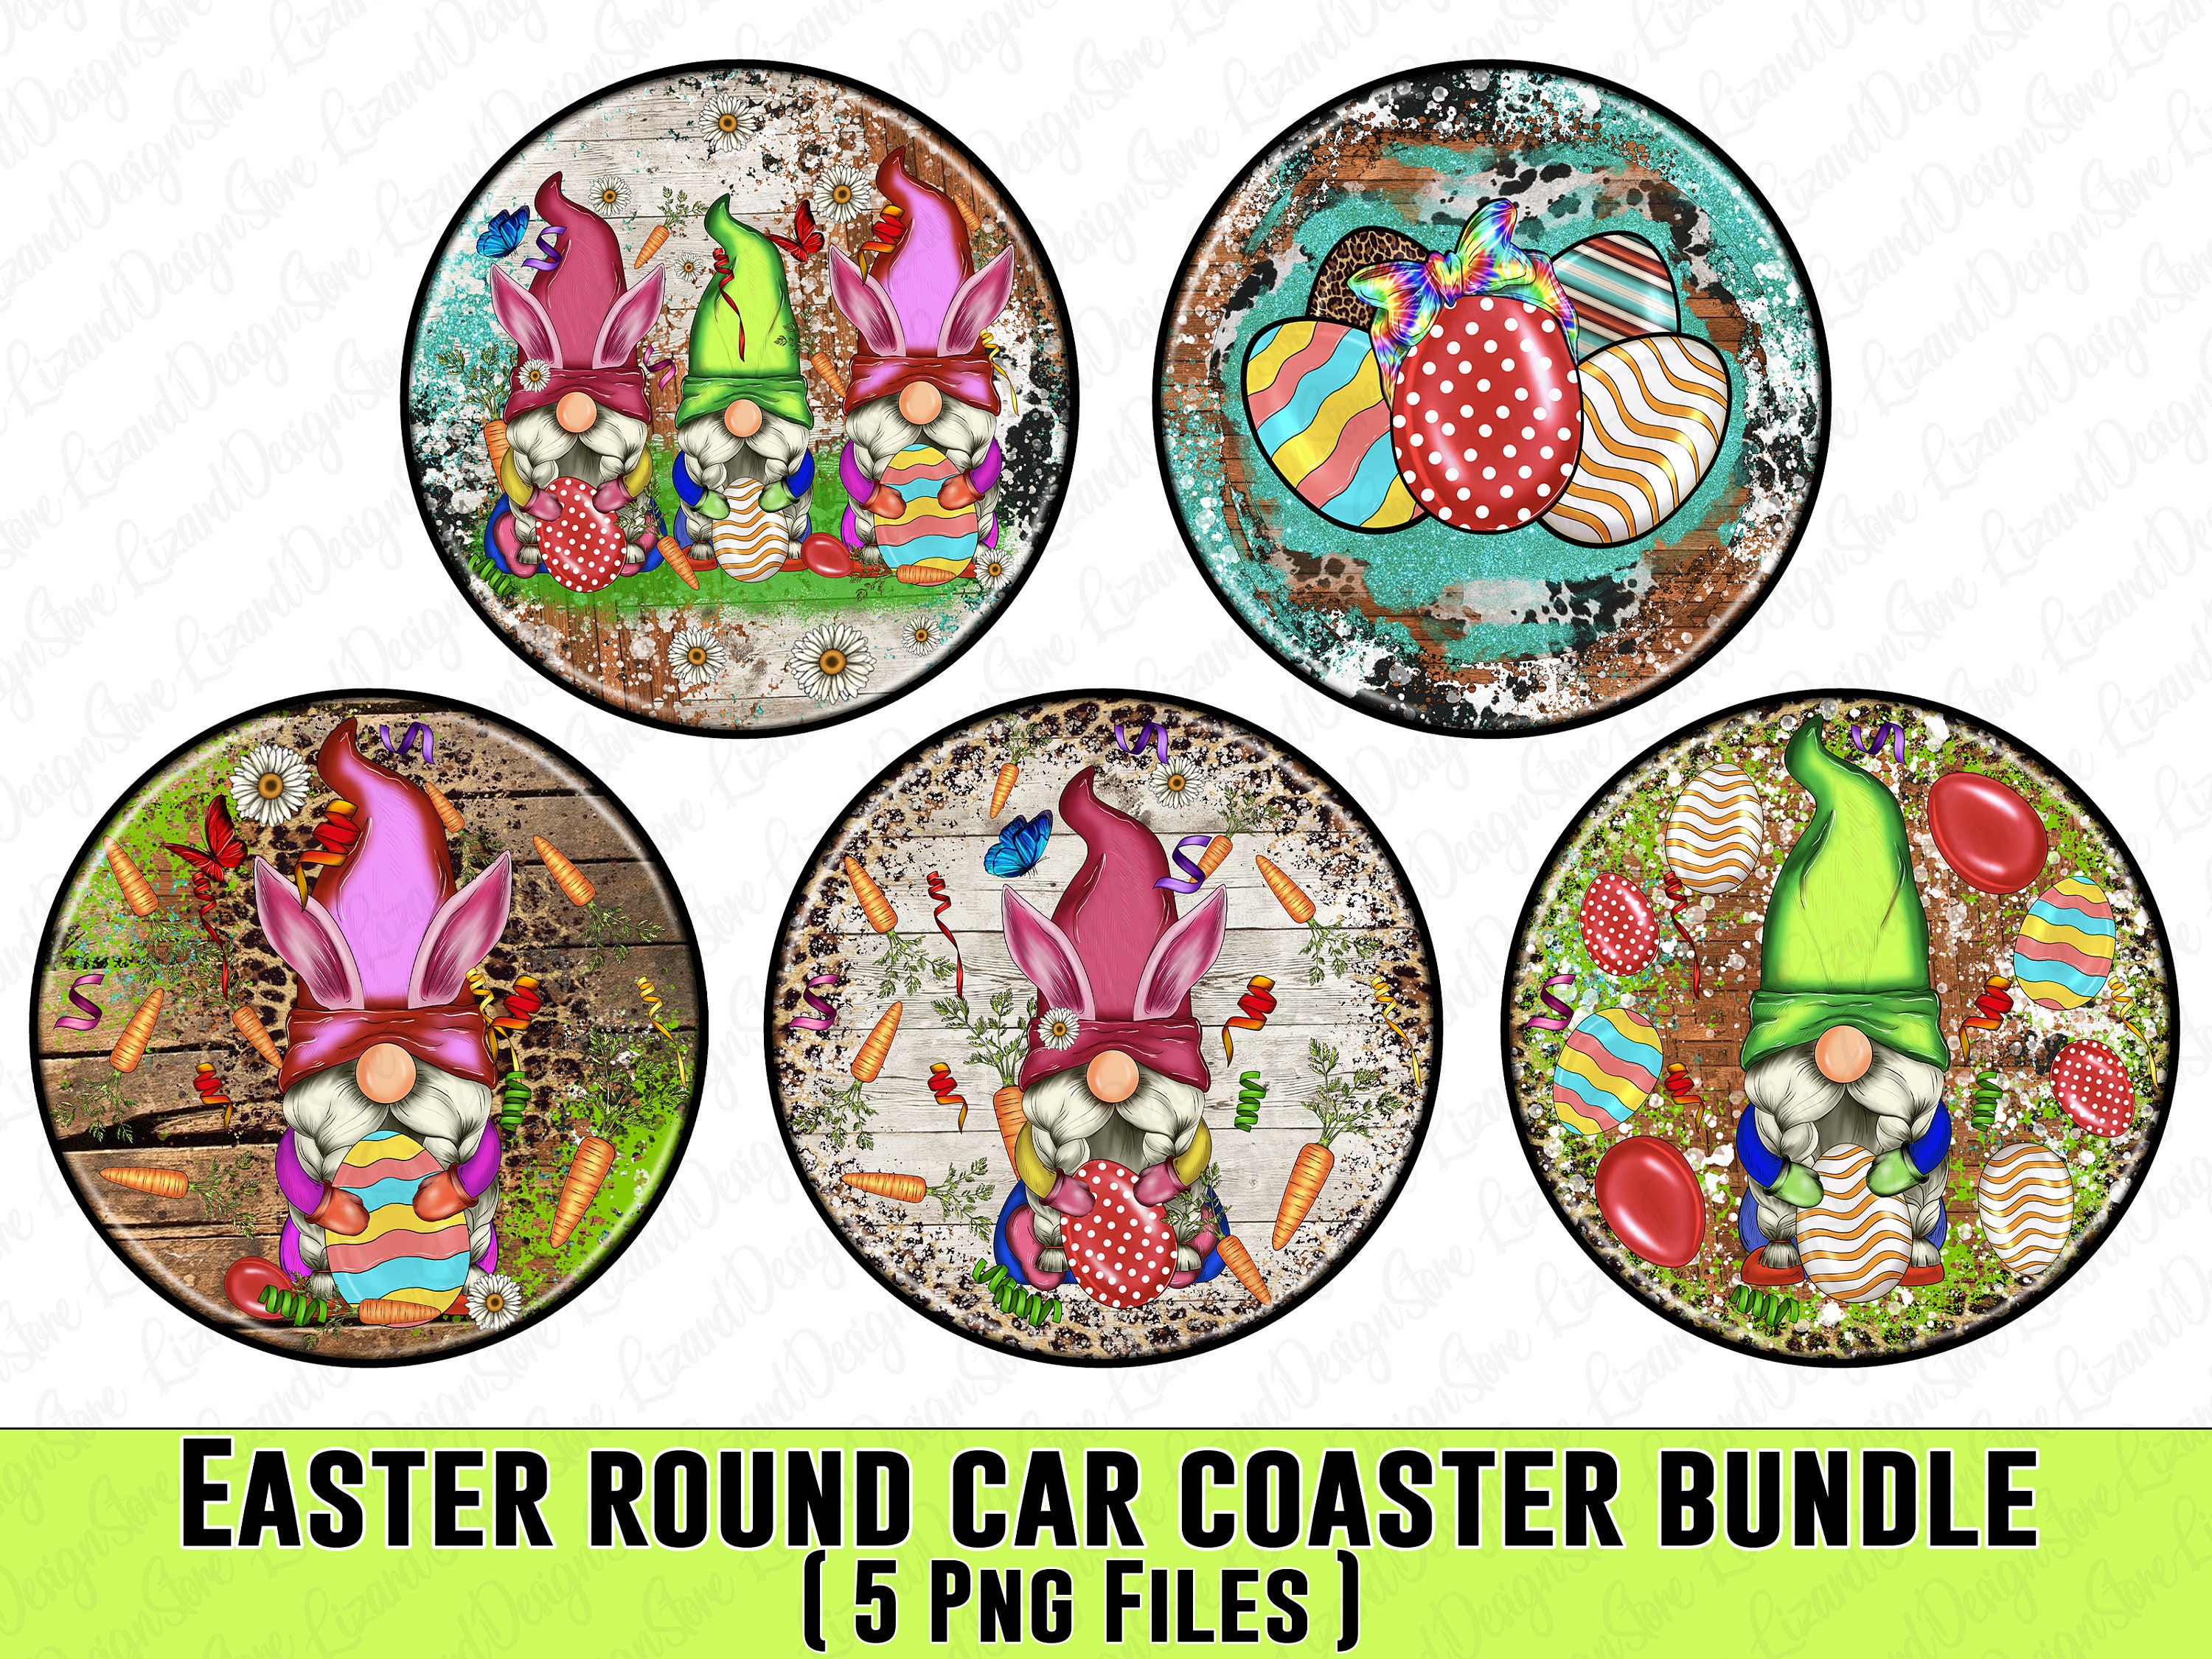 Easter Sublimation Car Coasters